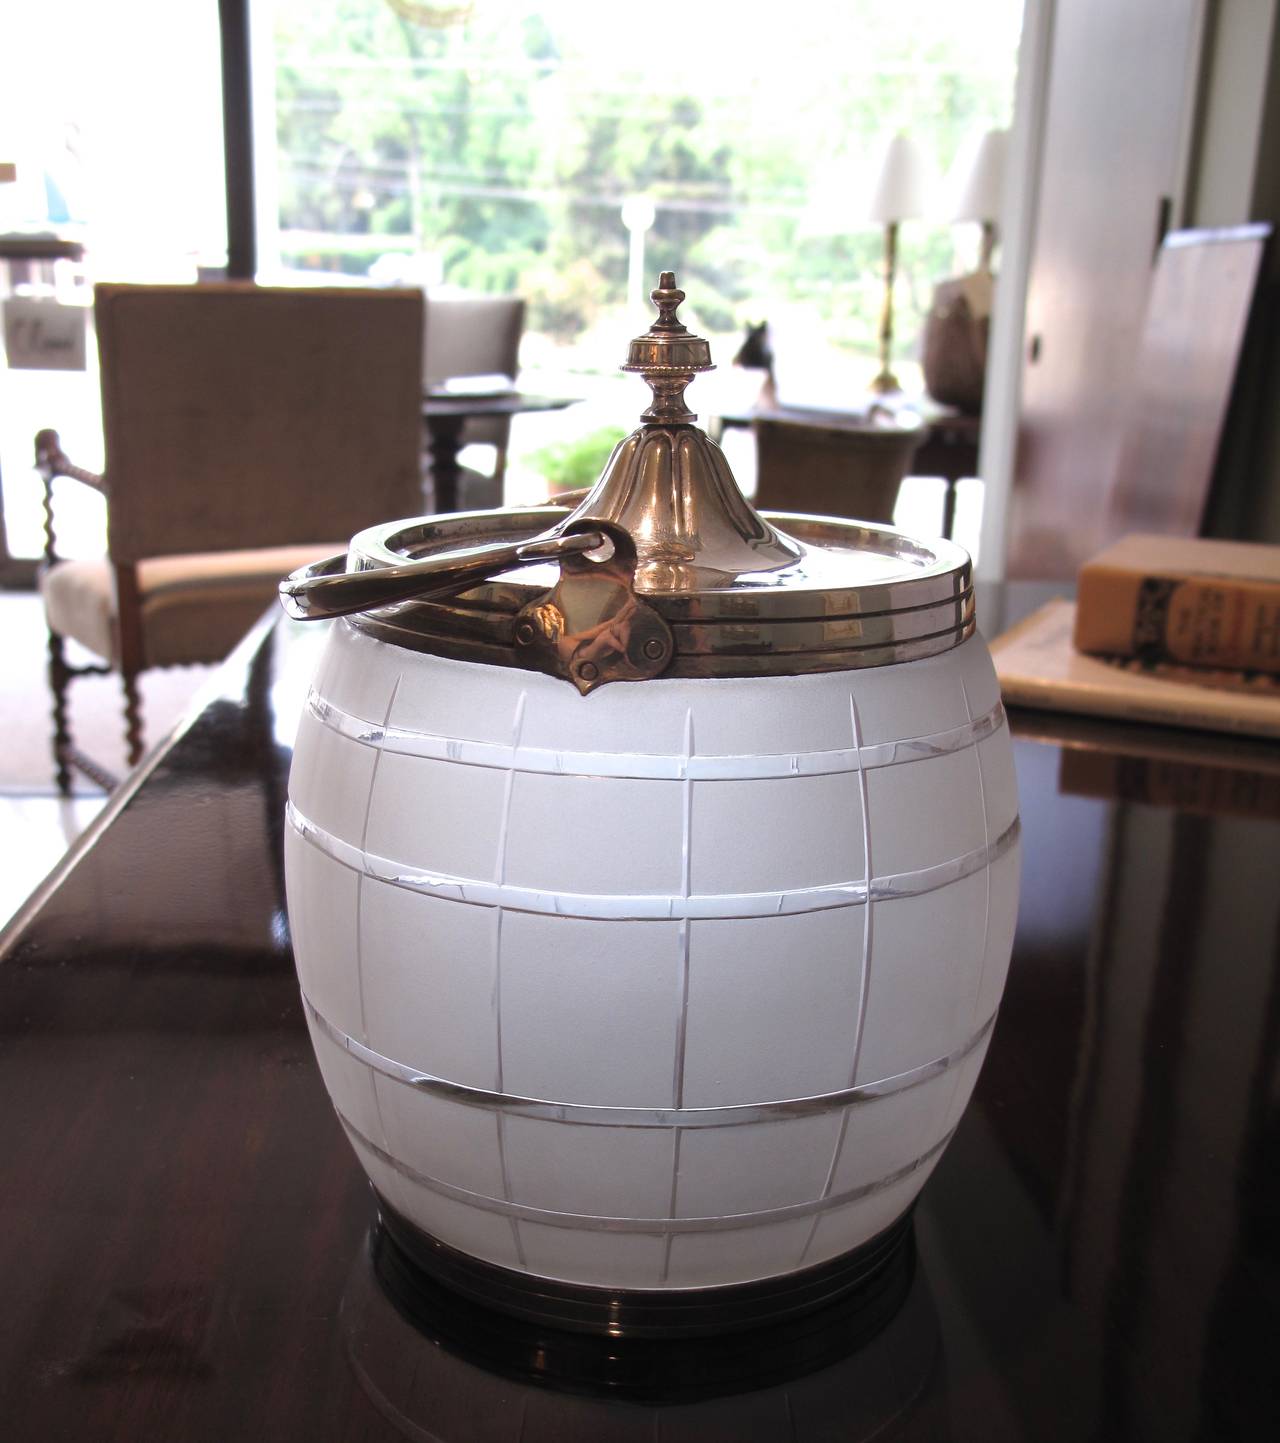 Of cut and frosted glass, in a barrel shape, with finely delineated and finished silver plate handle fittings and lid.